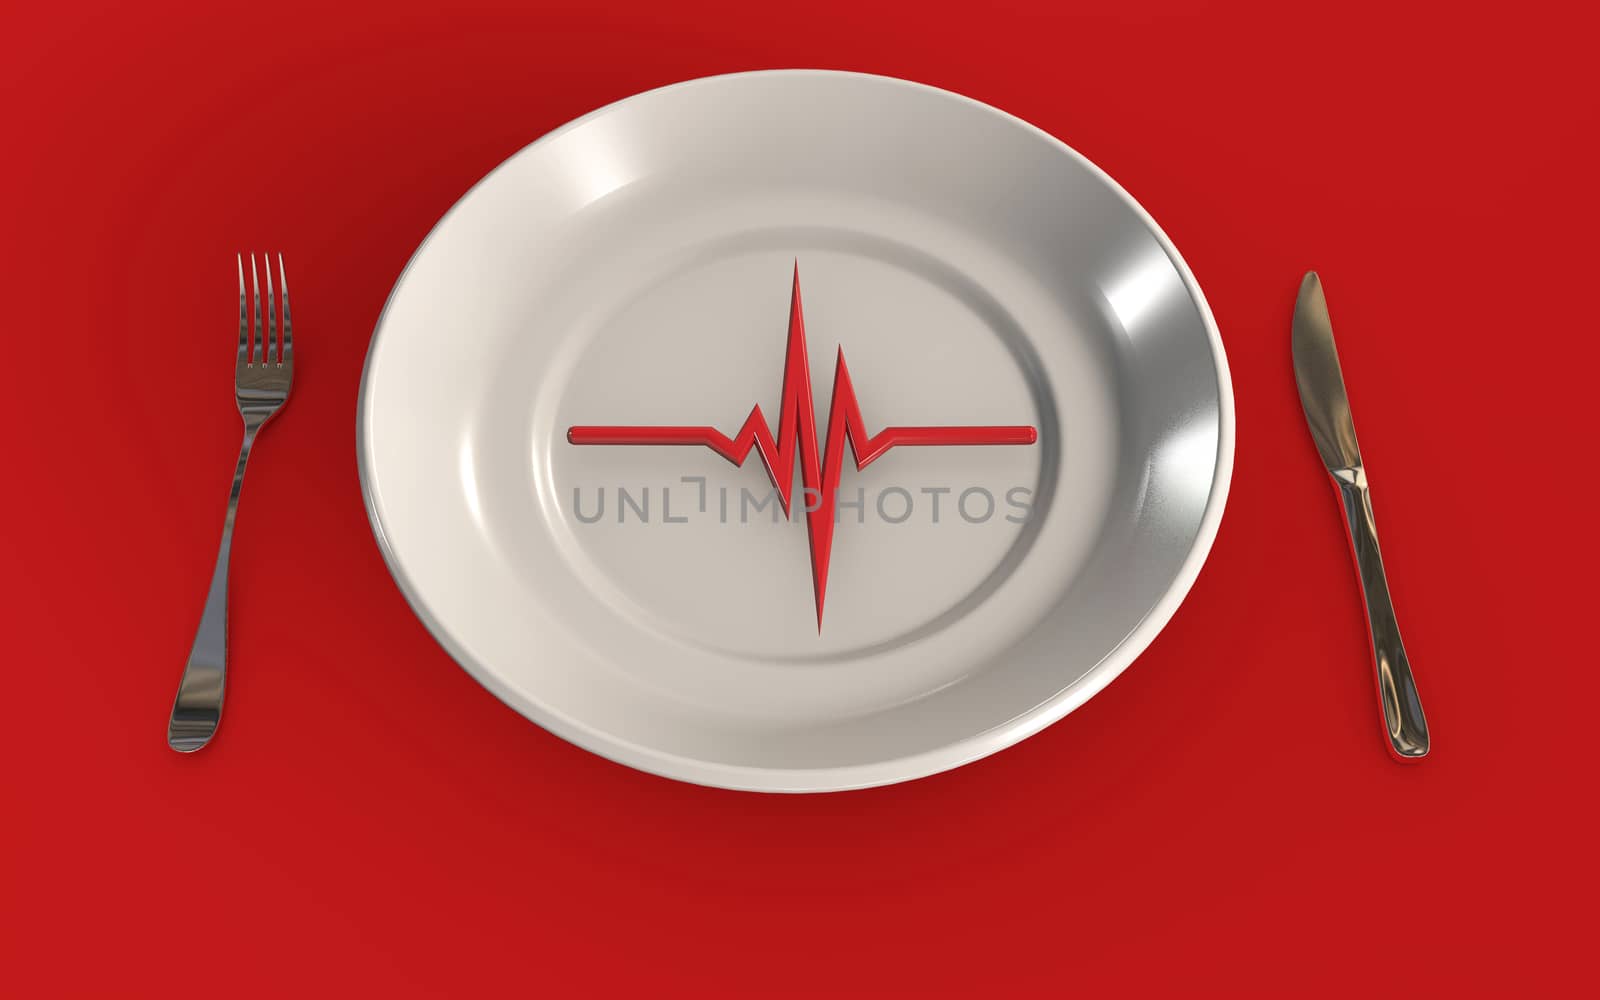 Pulse symbol on a plate heart health diet concept 3d rendered isolated on red background